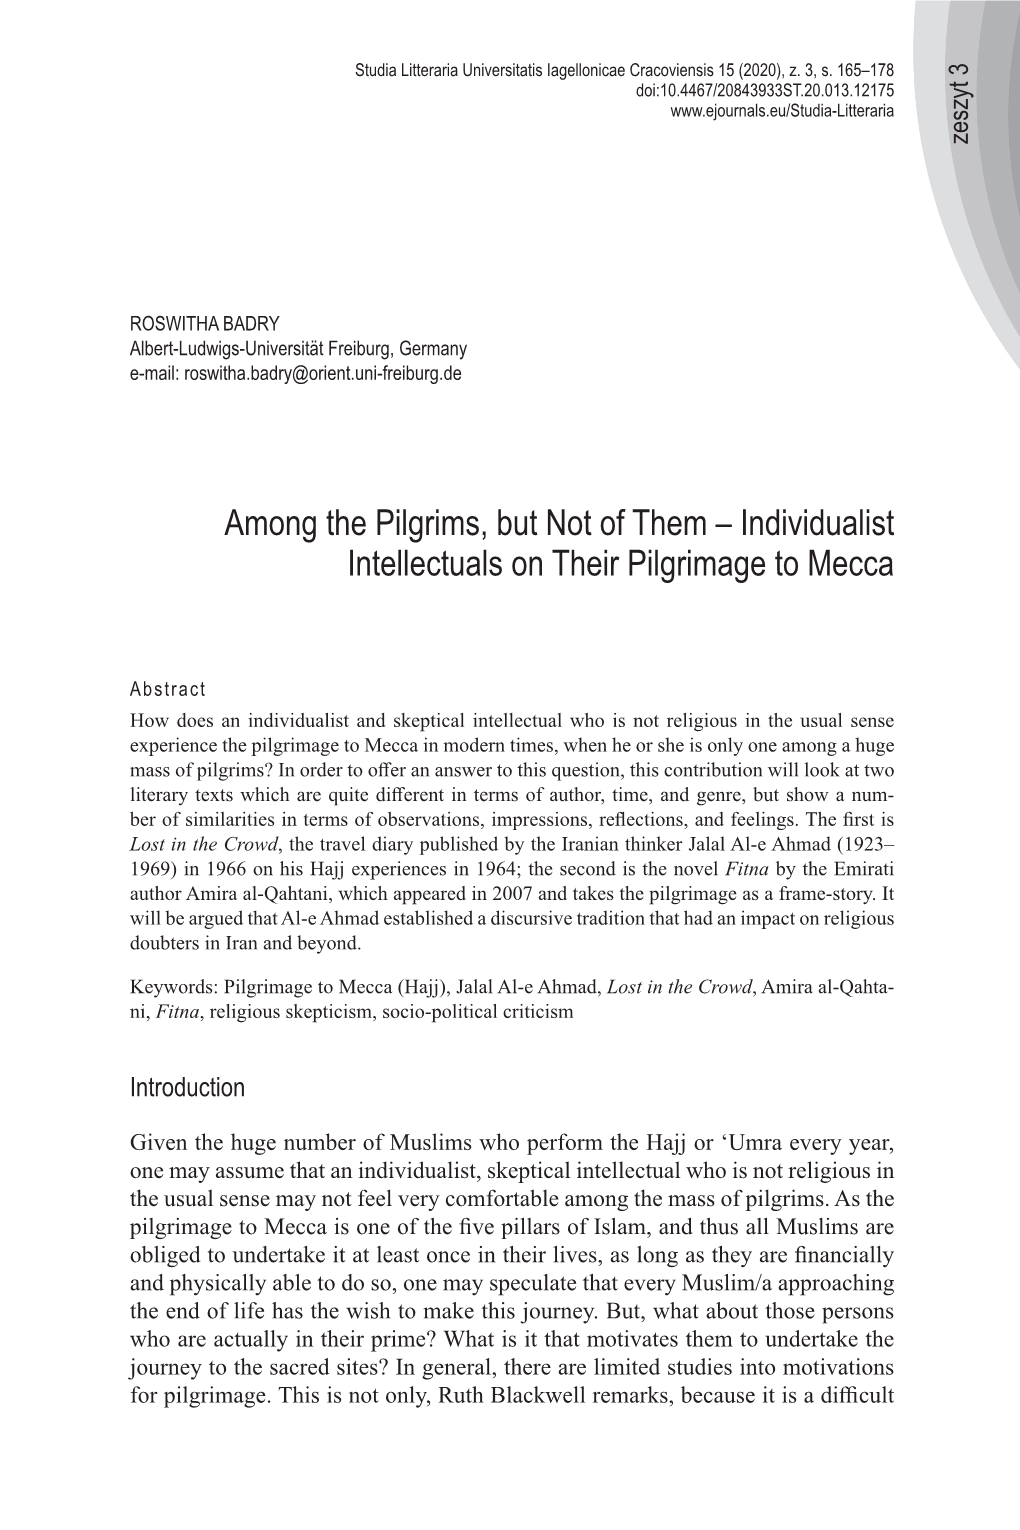 Among the Pilgrims, but Not of Them – Individualist Intellectuals on Their Pilgrimage to Mecca